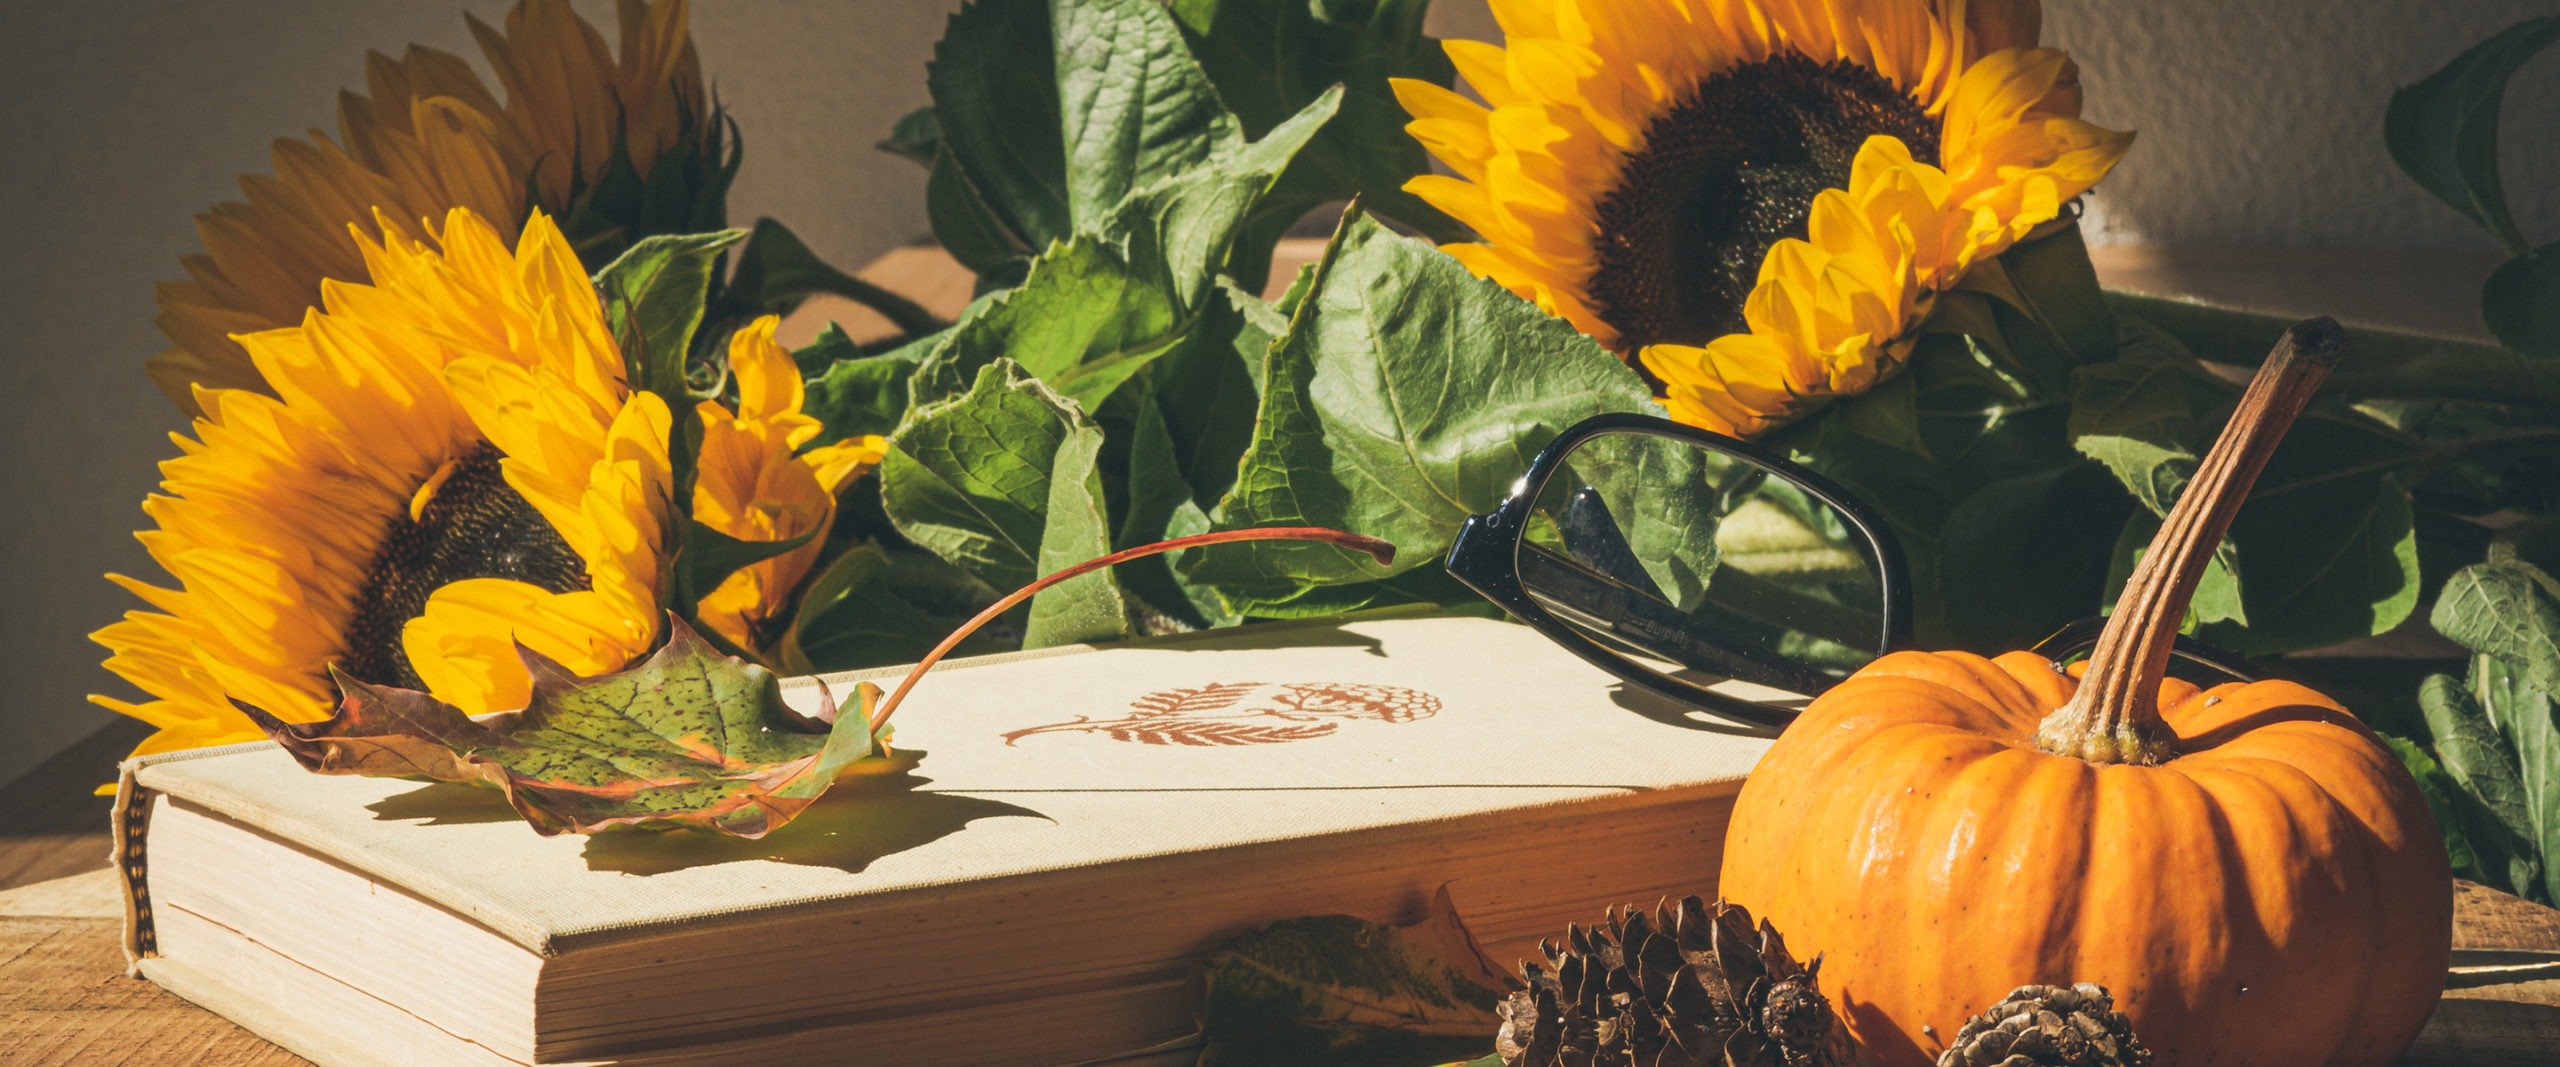 book on table surrounded by sunflowers and small pumpkin